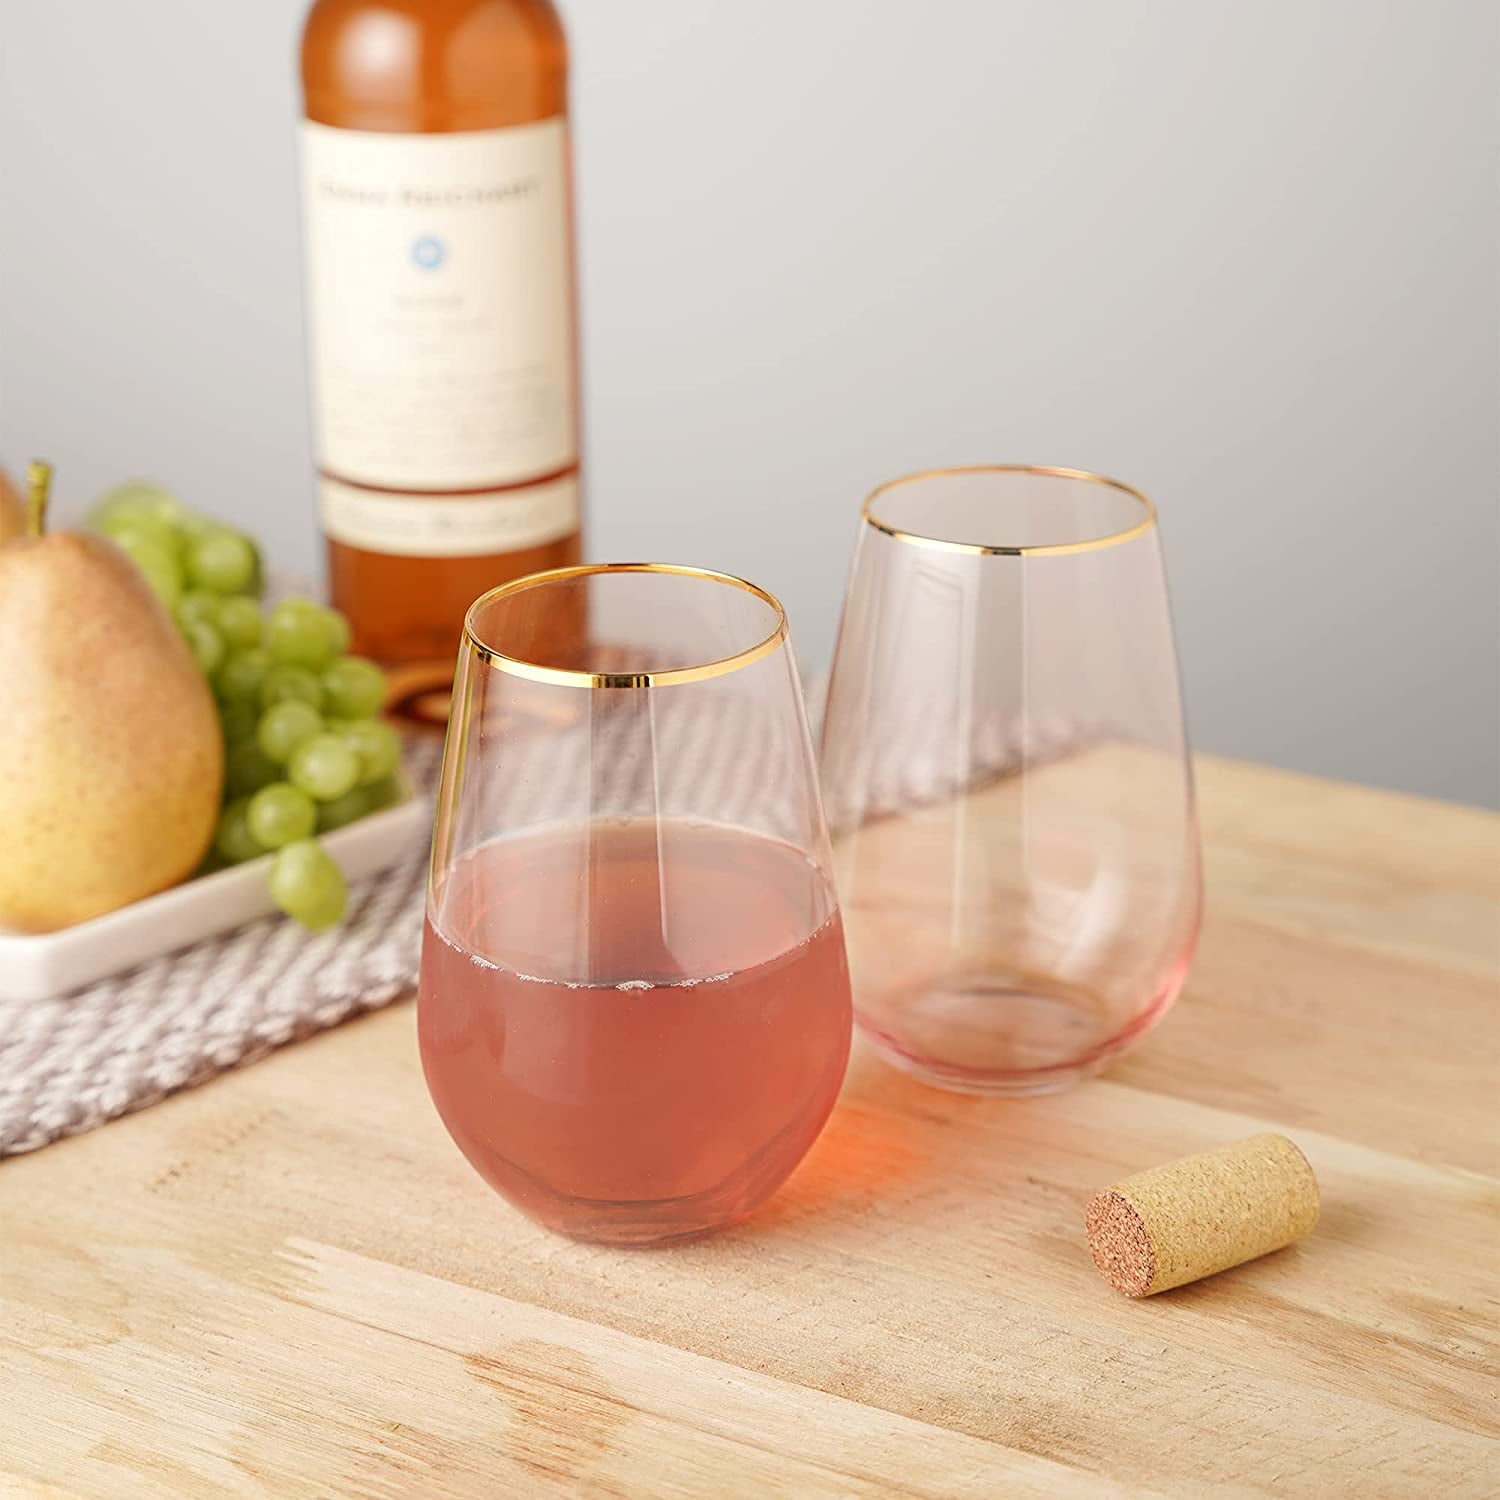 Spotted: The unique Stemless Wine Glasses have been featured on @Forbes 🍷  This set is perfect for enhancing your daily drinking experience …